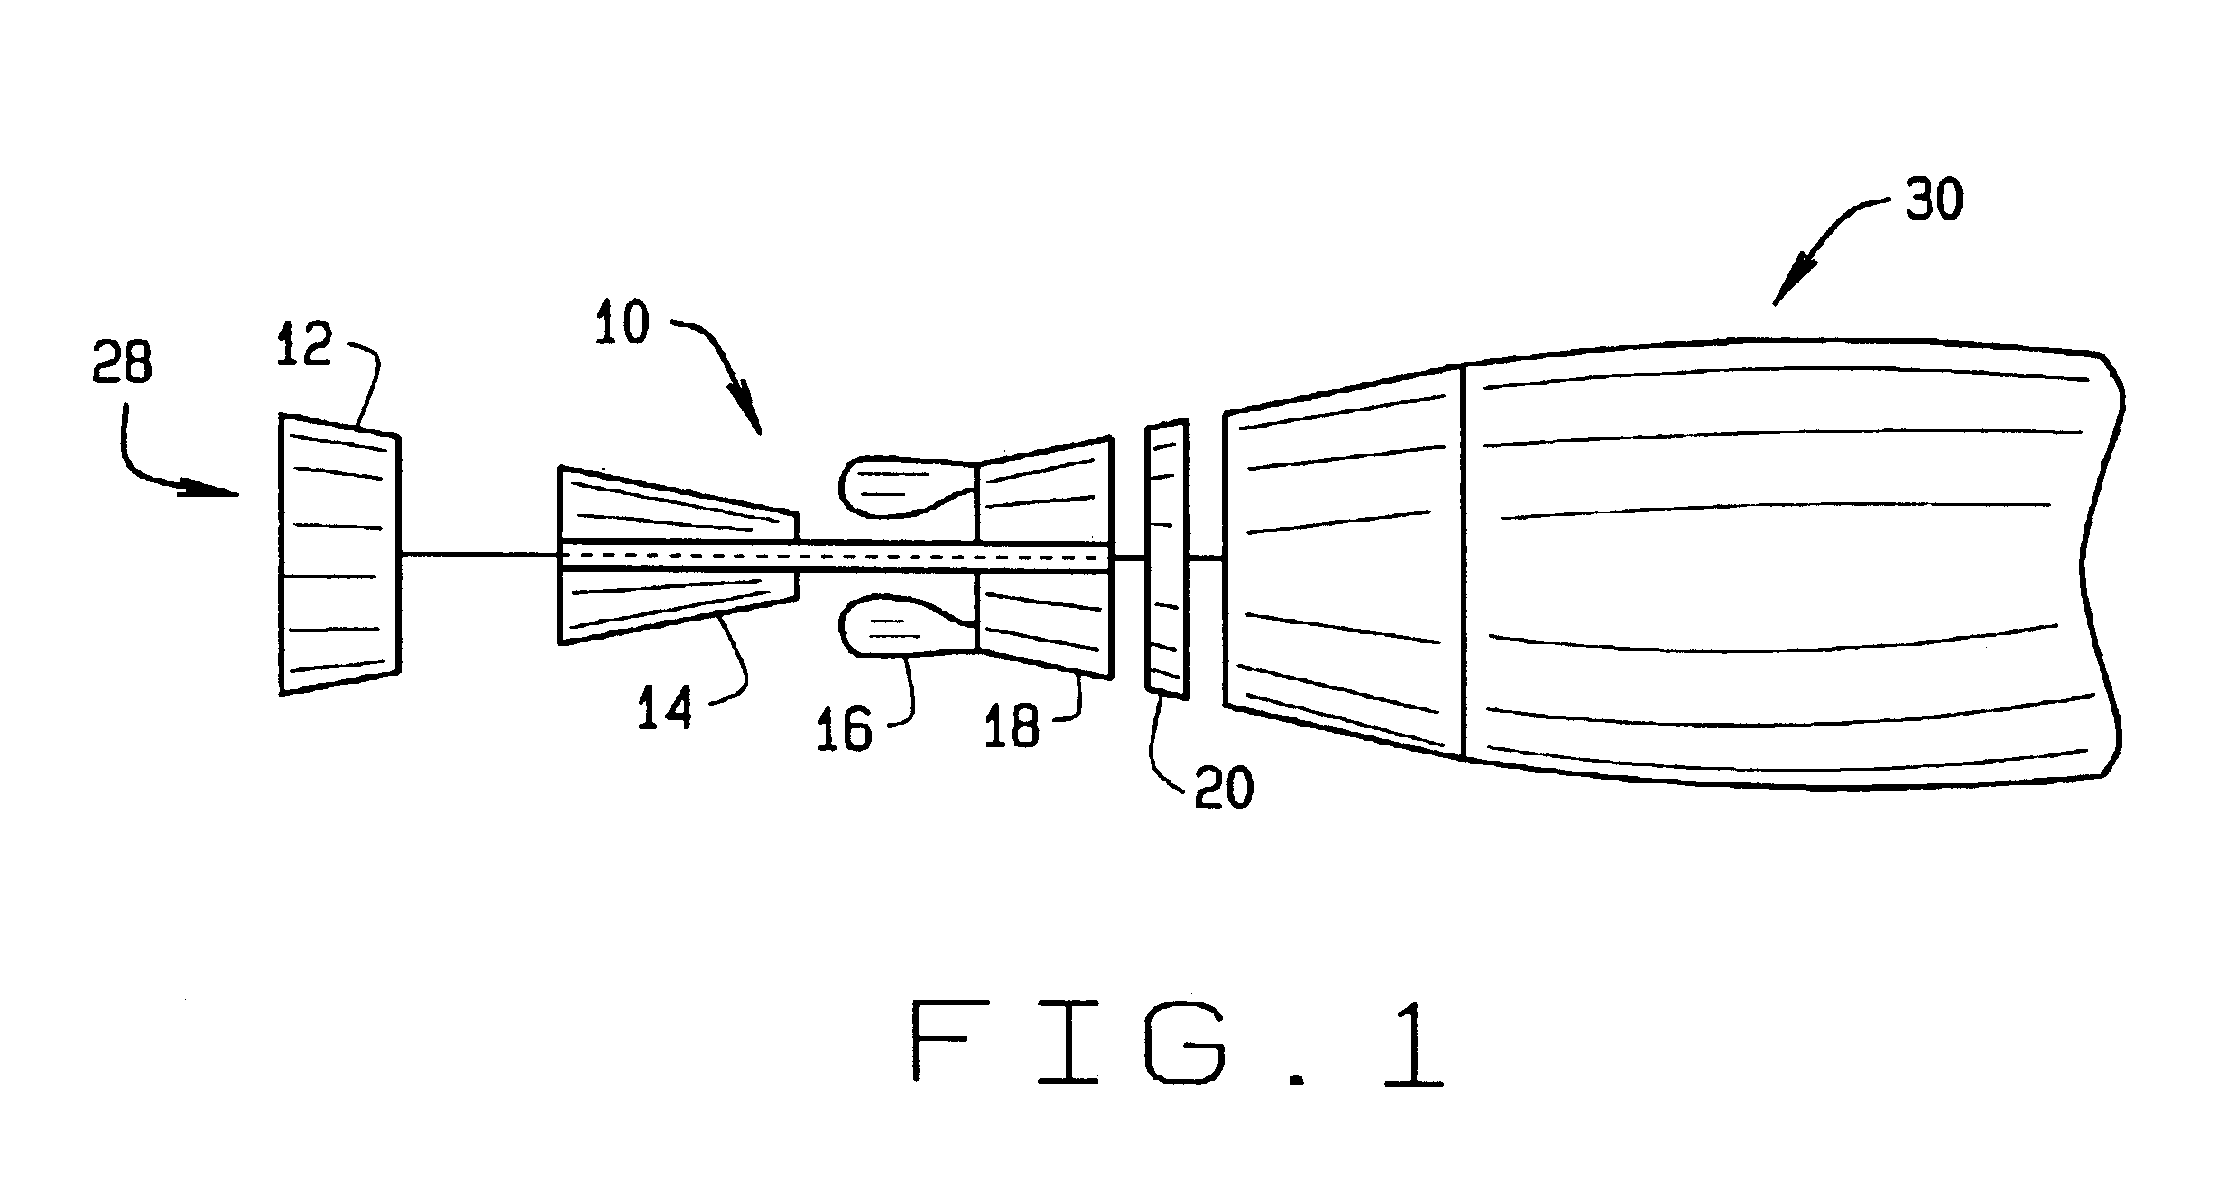 Methods and apparatus for securing multi-piece nozzle assemblies